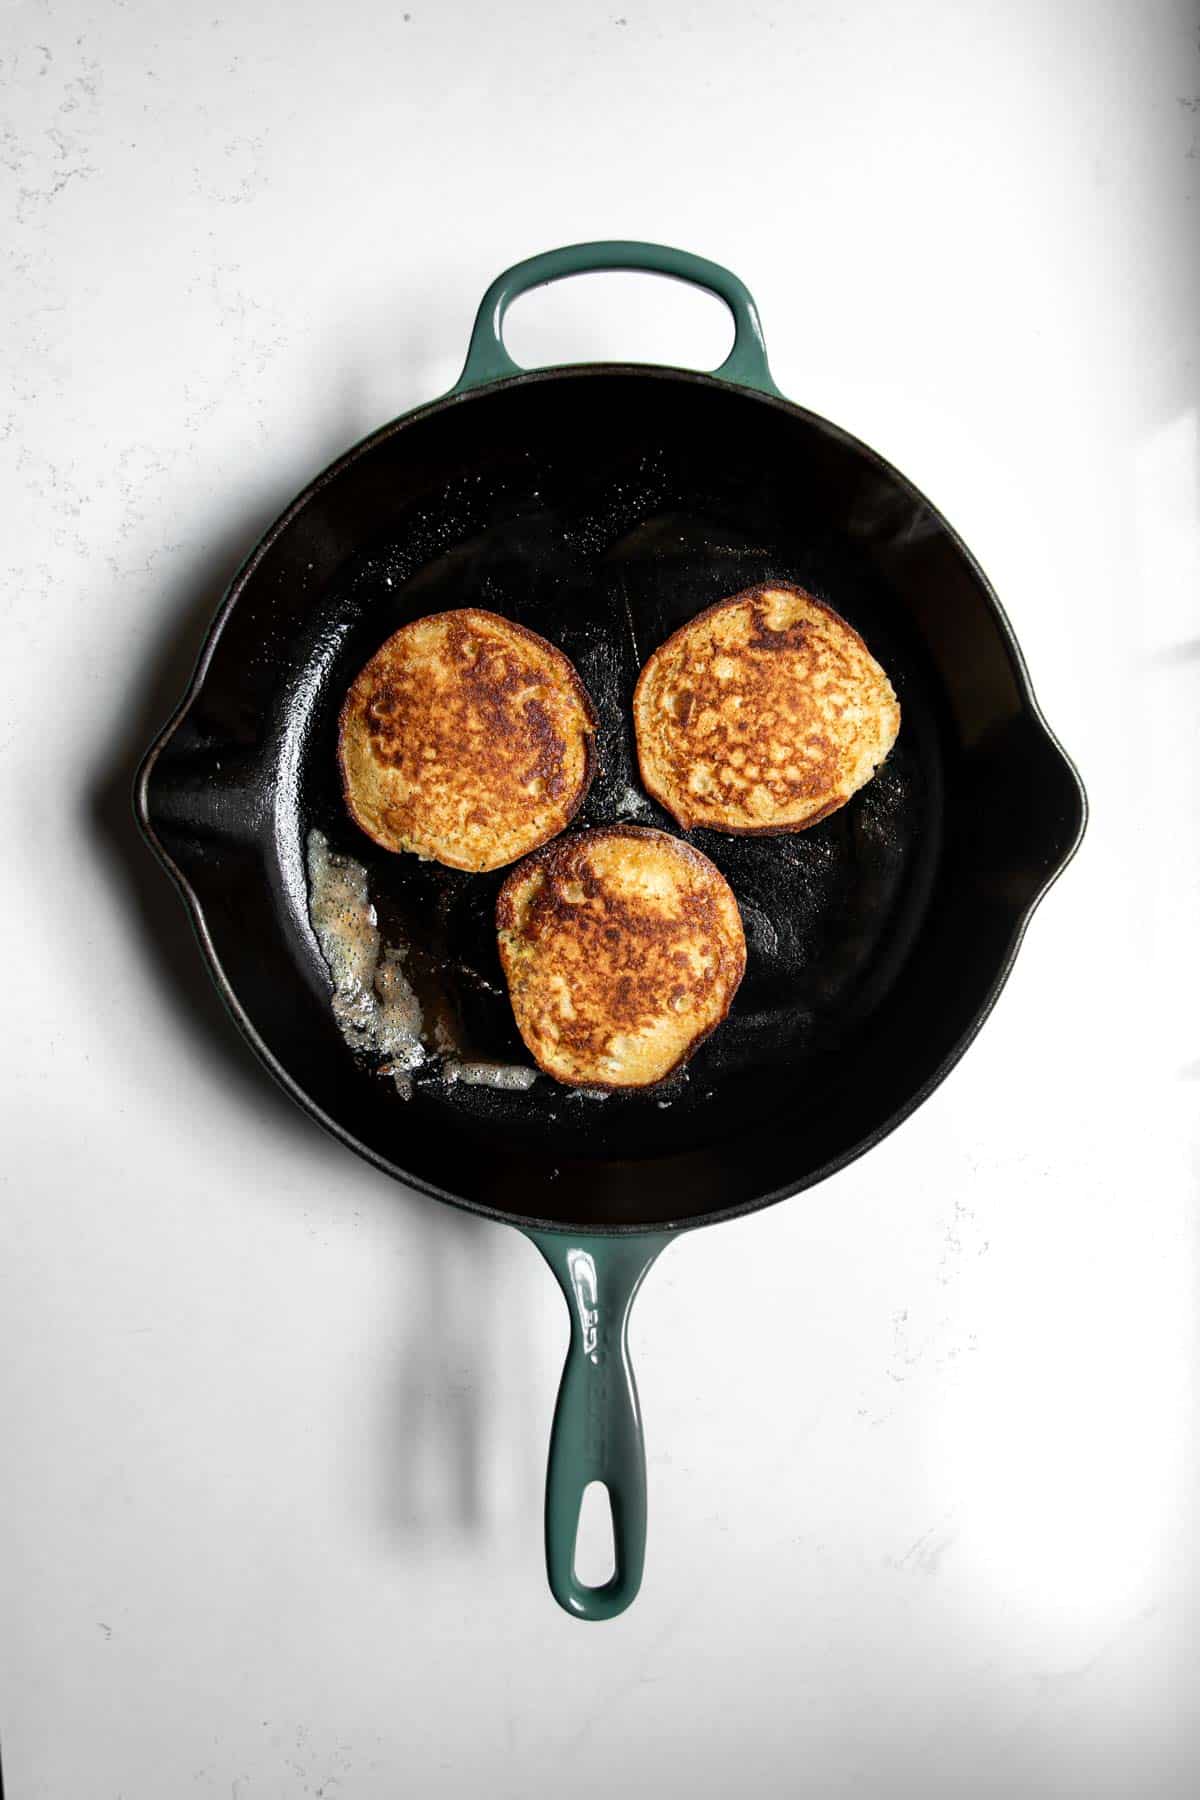 Three oat flour pancakes crispy and golden sitting on a skillet having been fully cooked.